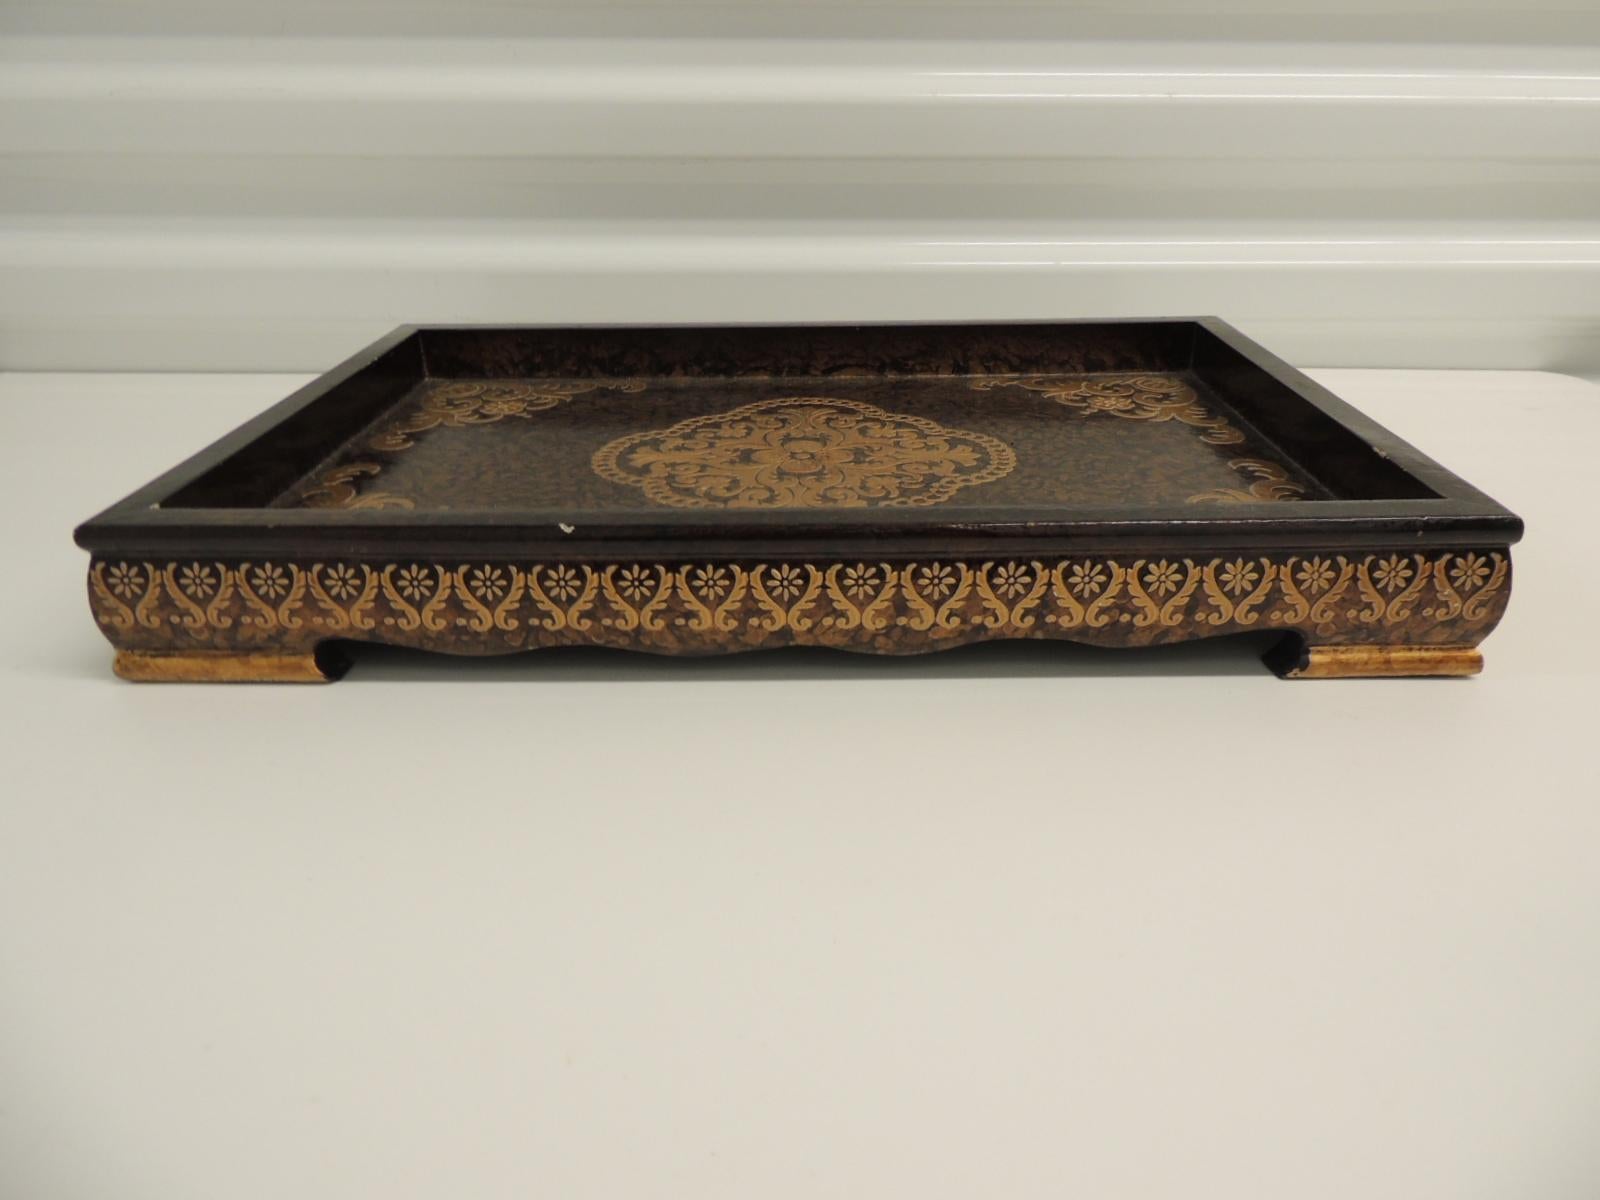 Chinese Asian Lacquered Decorative Wood Modern Tray in Brown and Gold